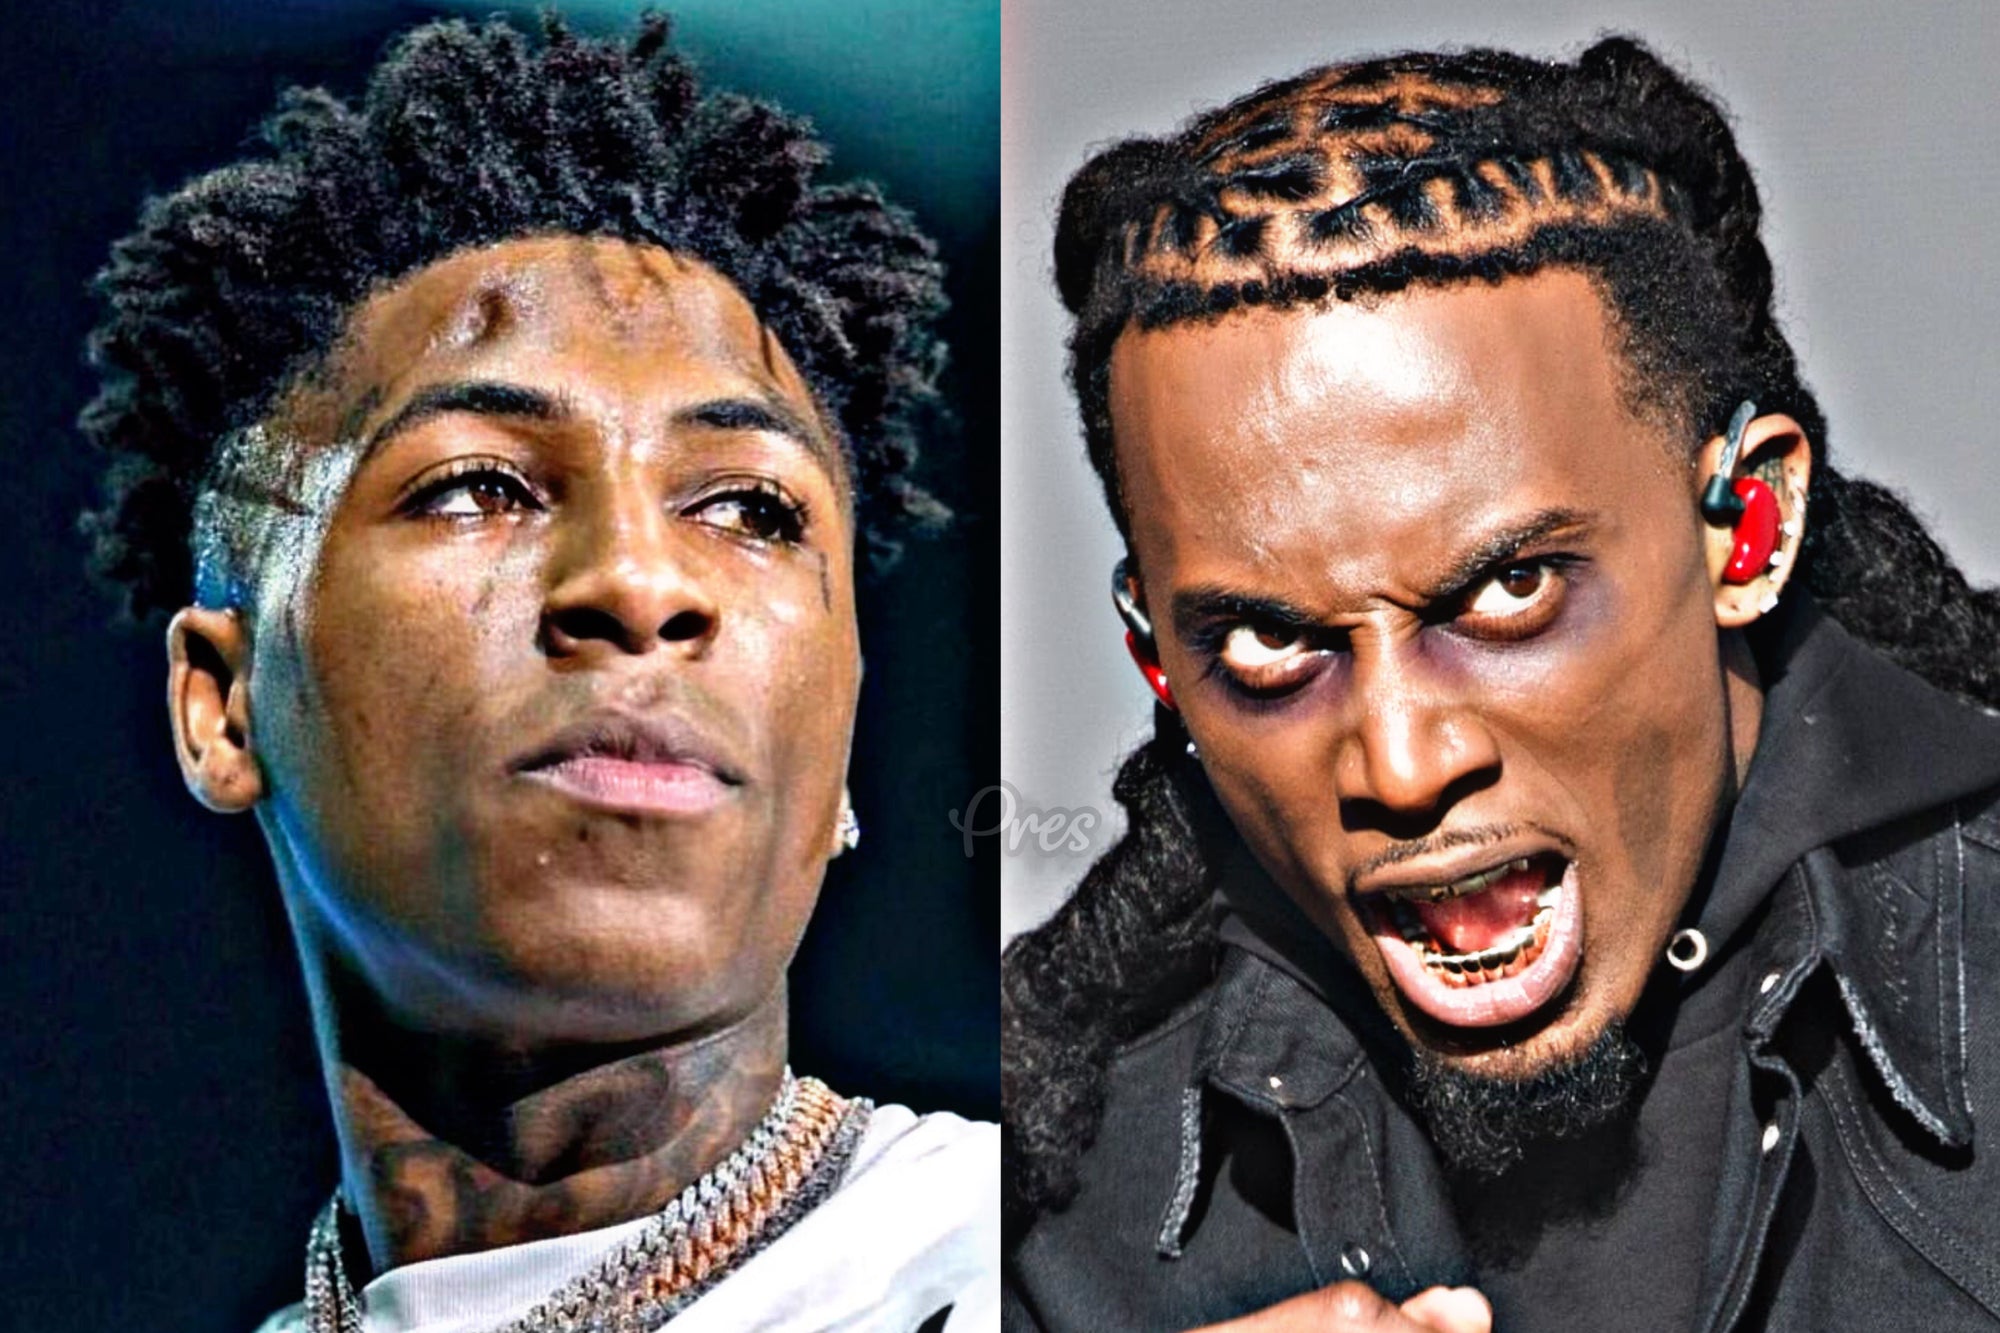 Playboi Carti Gifts NBA YoungBoy an Opium Chain, Hinting at Joint Album Release